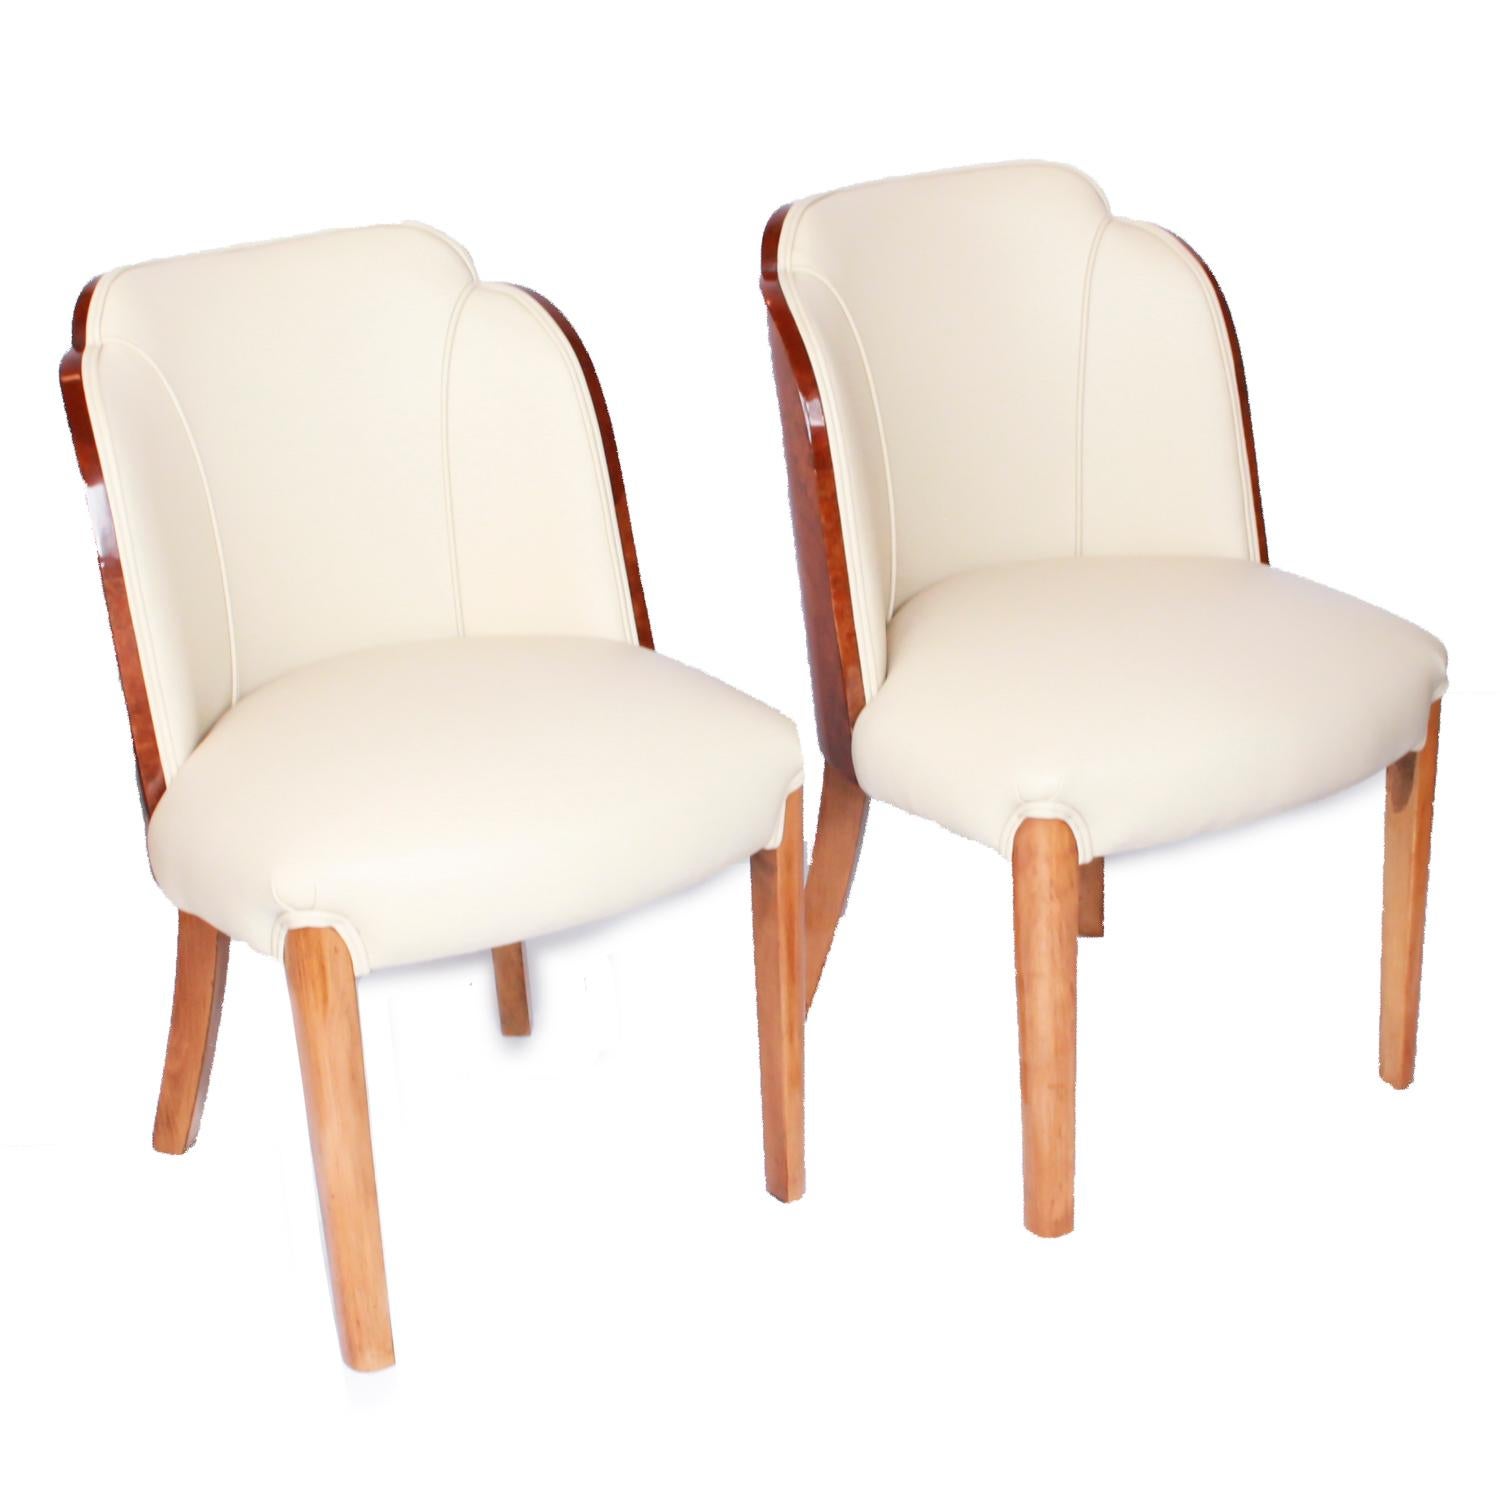 A pair of Art Deco cloud back chairs, re-upholstered in cream leather and Alcantara suede.

Dimensions: H 83 cm, W 52 cm, seat H 50 cm, seat D 50 cm

Origin: English

Date: circa 1935

Item No: 1410194.
     